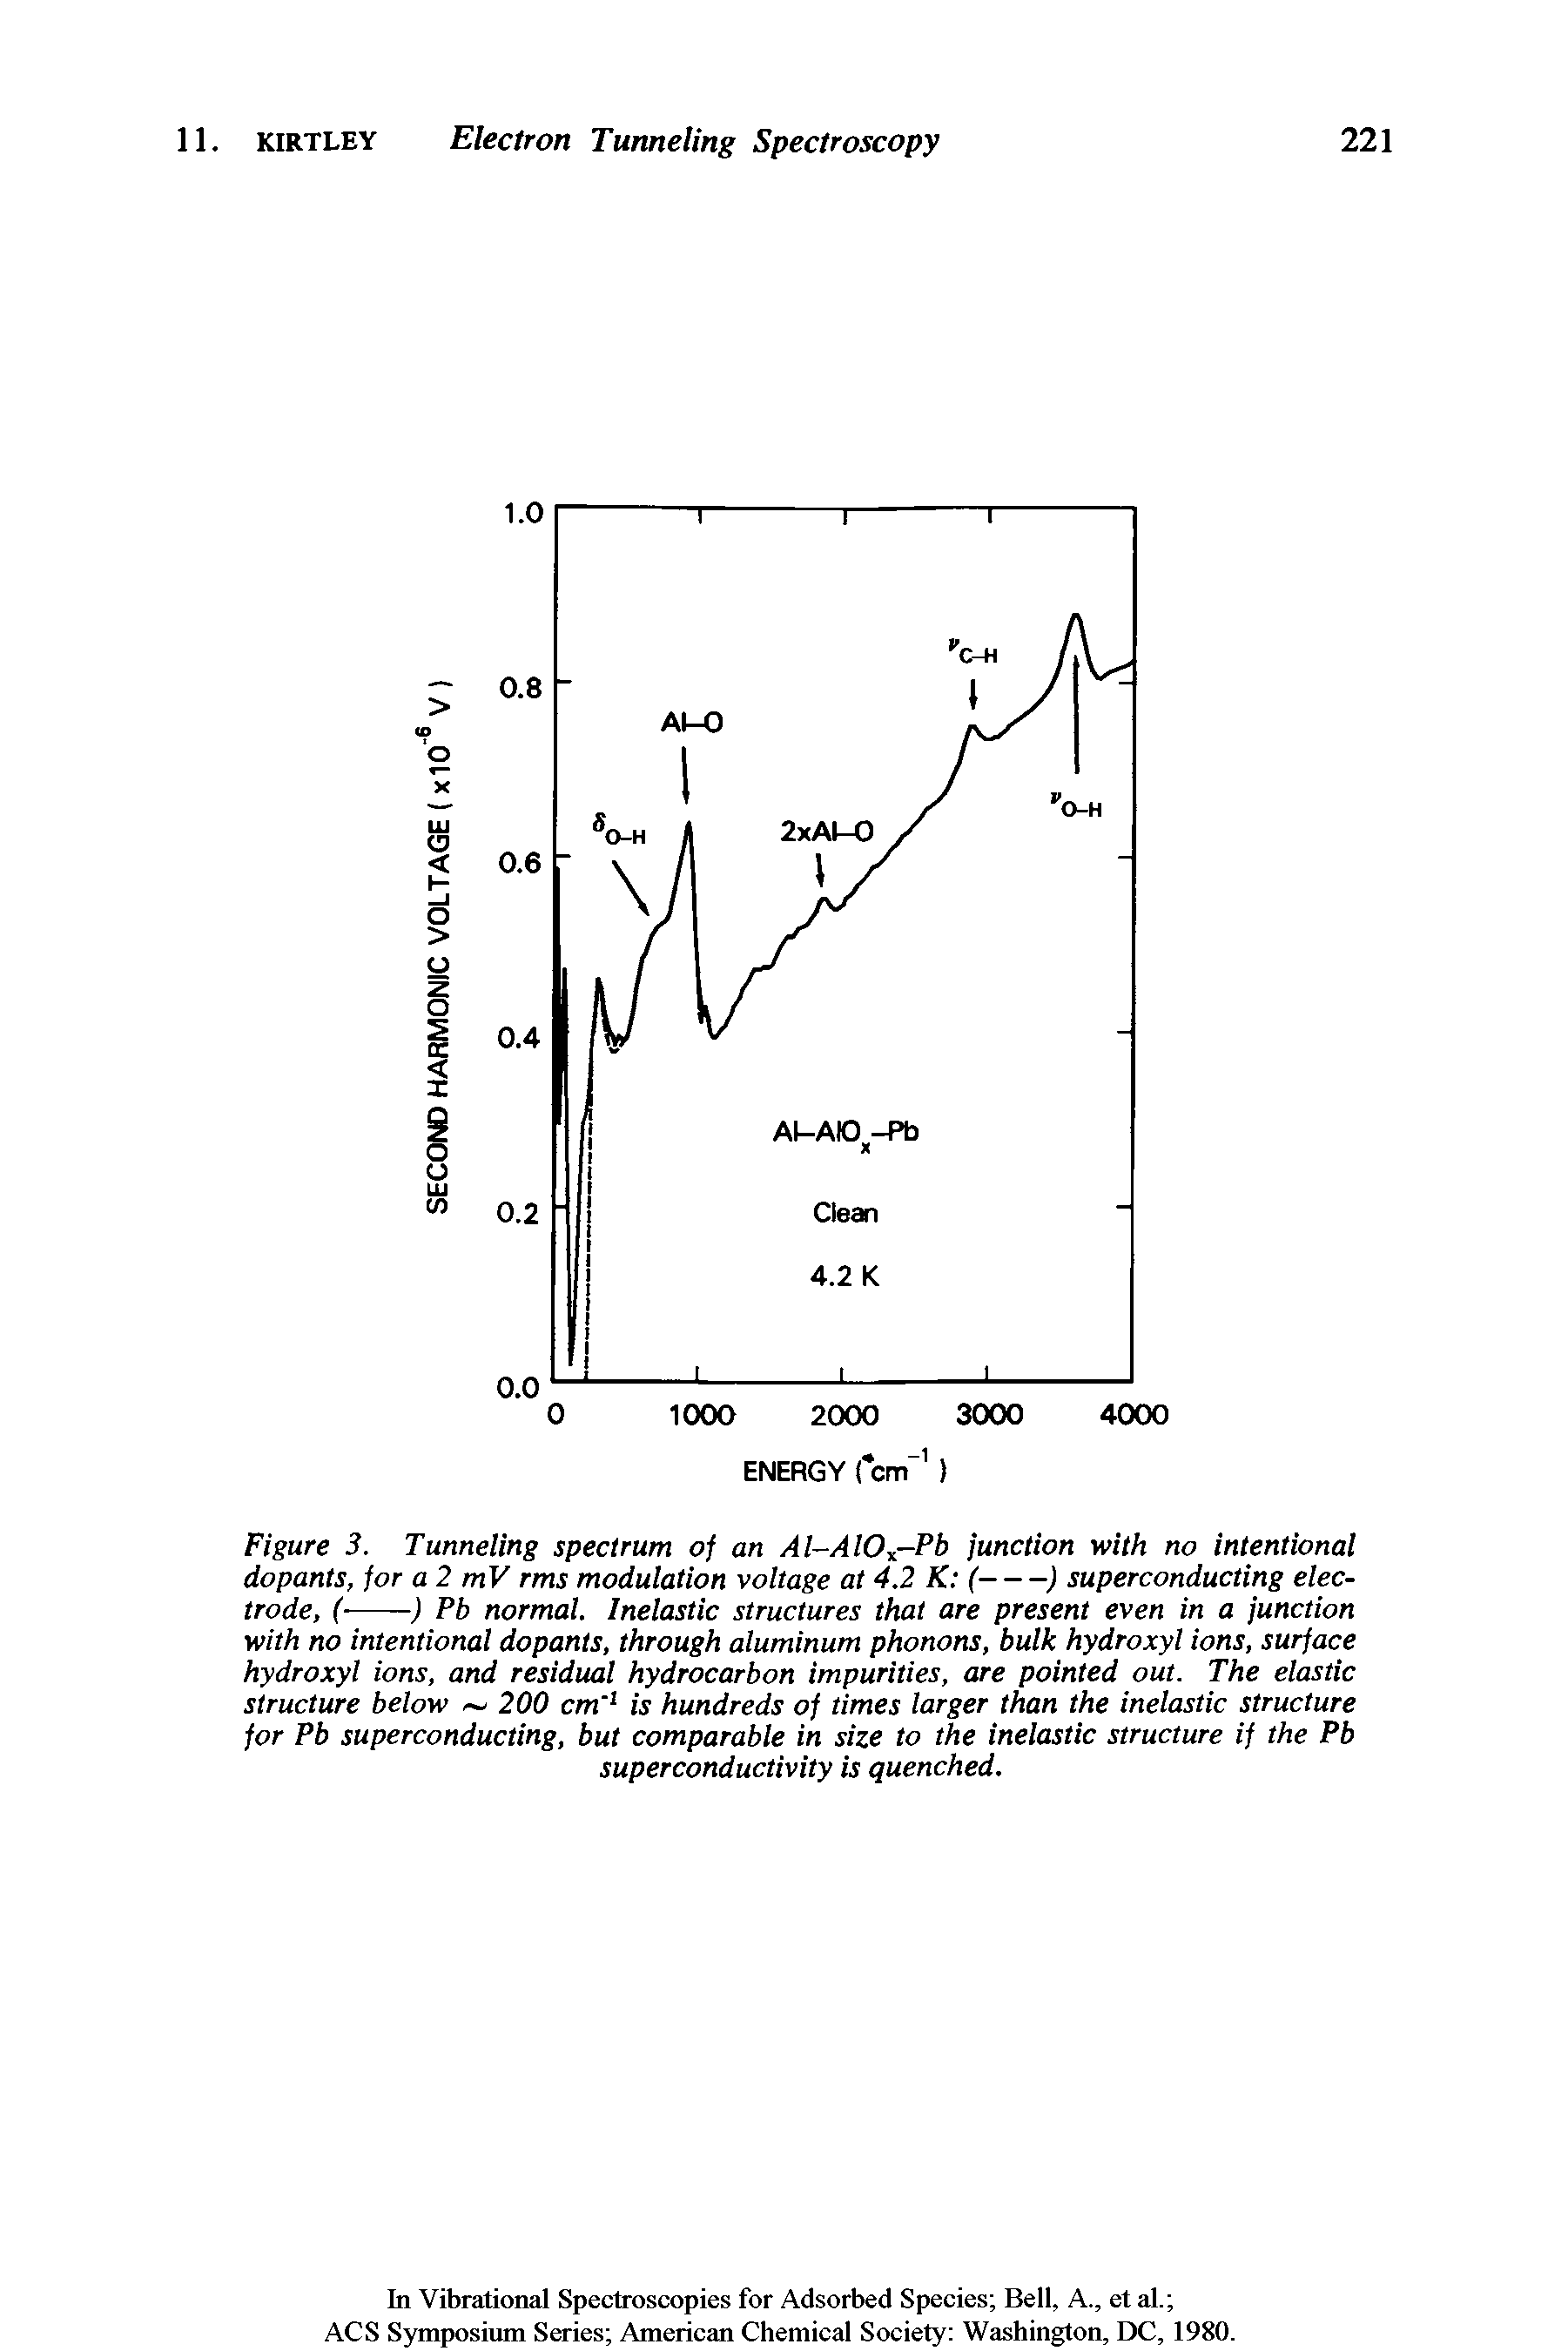 Figure 3. Tunneling spectrum of an A l-A I0x-Pb junction with no intentional dopants, for a 2 mV rms modulation voltage at 4.2 K (---) superconducting electrode, ( ---) Pb normal. Inelastic structures that are present even in a junction...